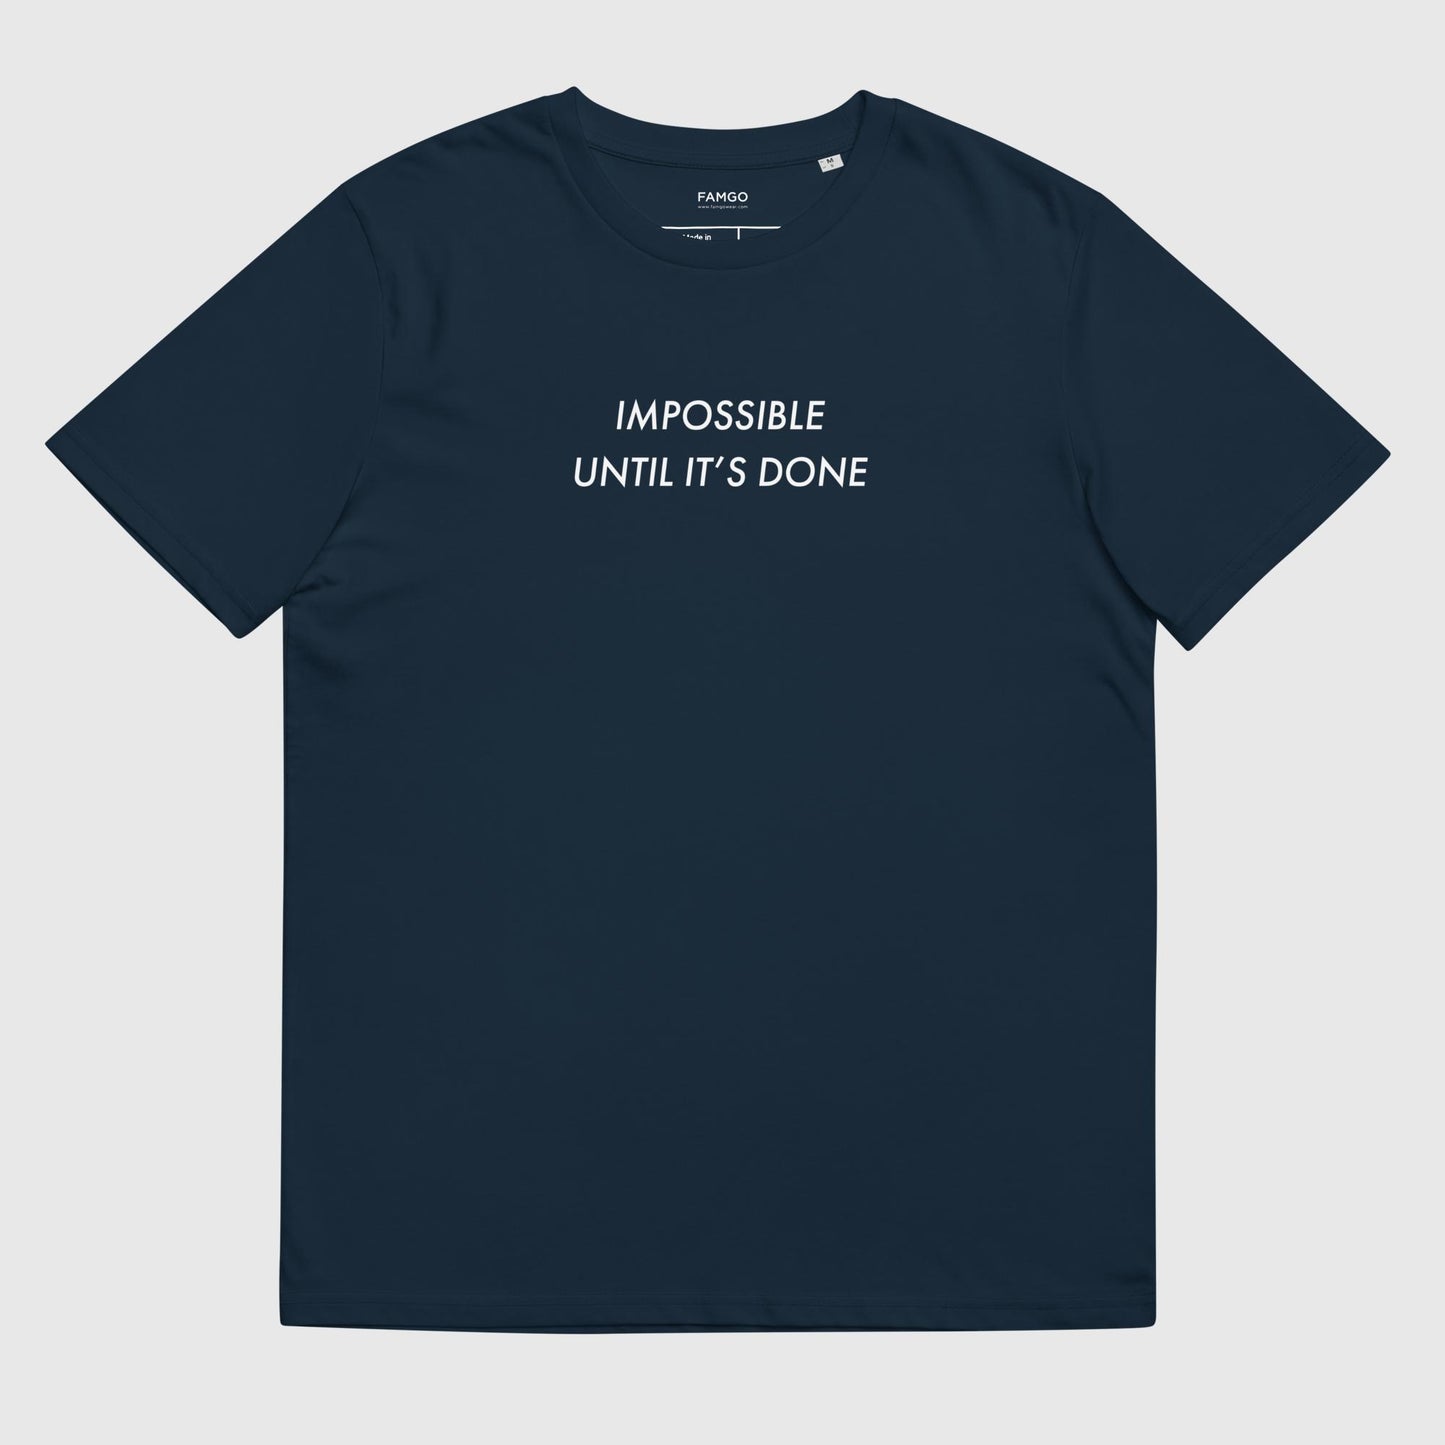 Men's french navy organic cotton t-shirt that features, "Impossible Until It's Done," inspired by Nelson Mandela's inspirational quote, "It always seems impossible until it's done."